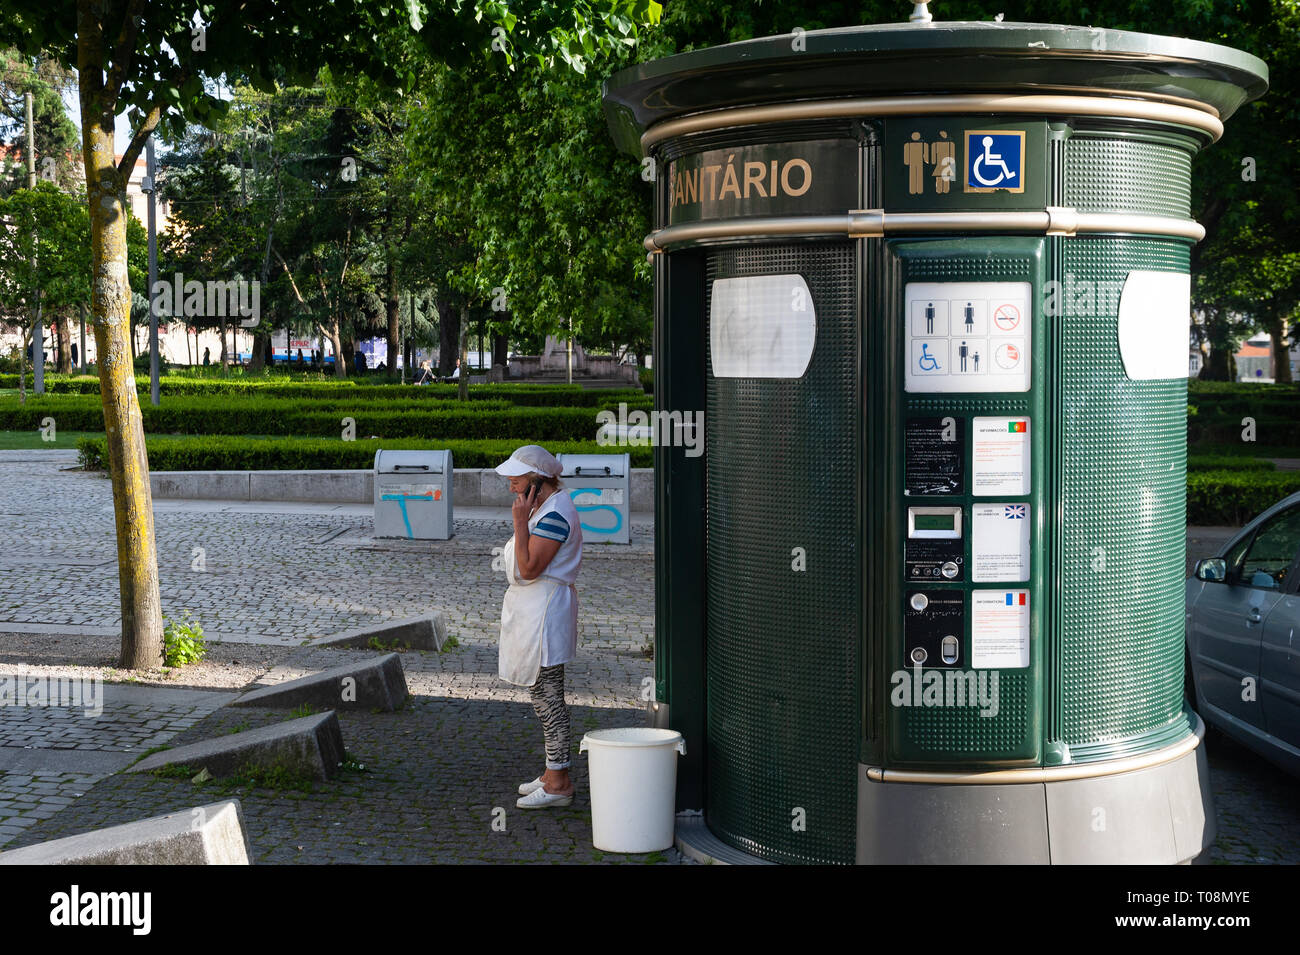 13.06.2018, Porto, Norte, Portugal - A cleaner is on the phone in front of a public toilet in the Altsatdt of Porto. 0SL180613D015CAROEX.JPG [MODEL RE Stock Photo